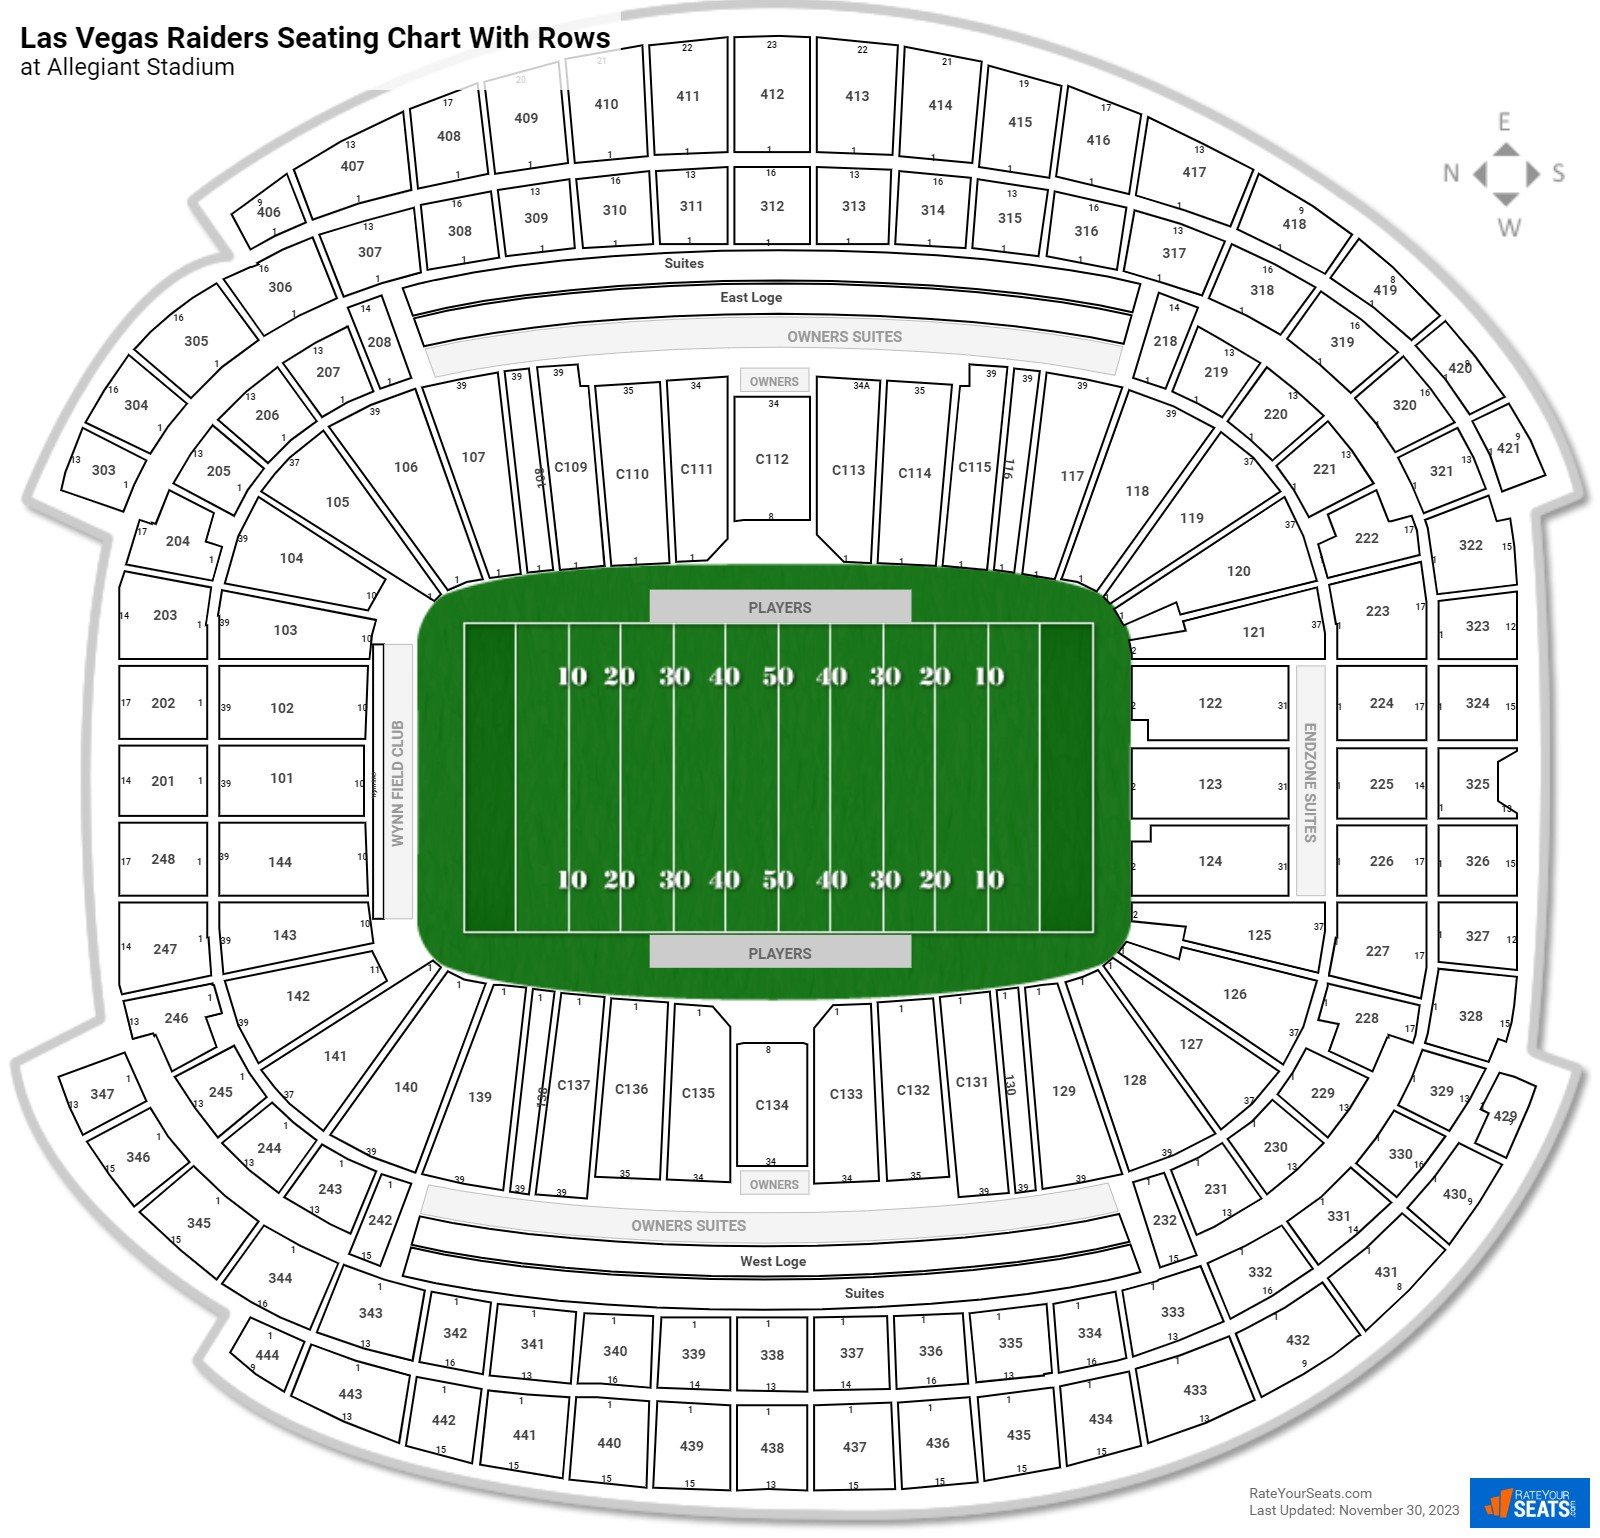 Allegiant Stadium seating chart with row numbers